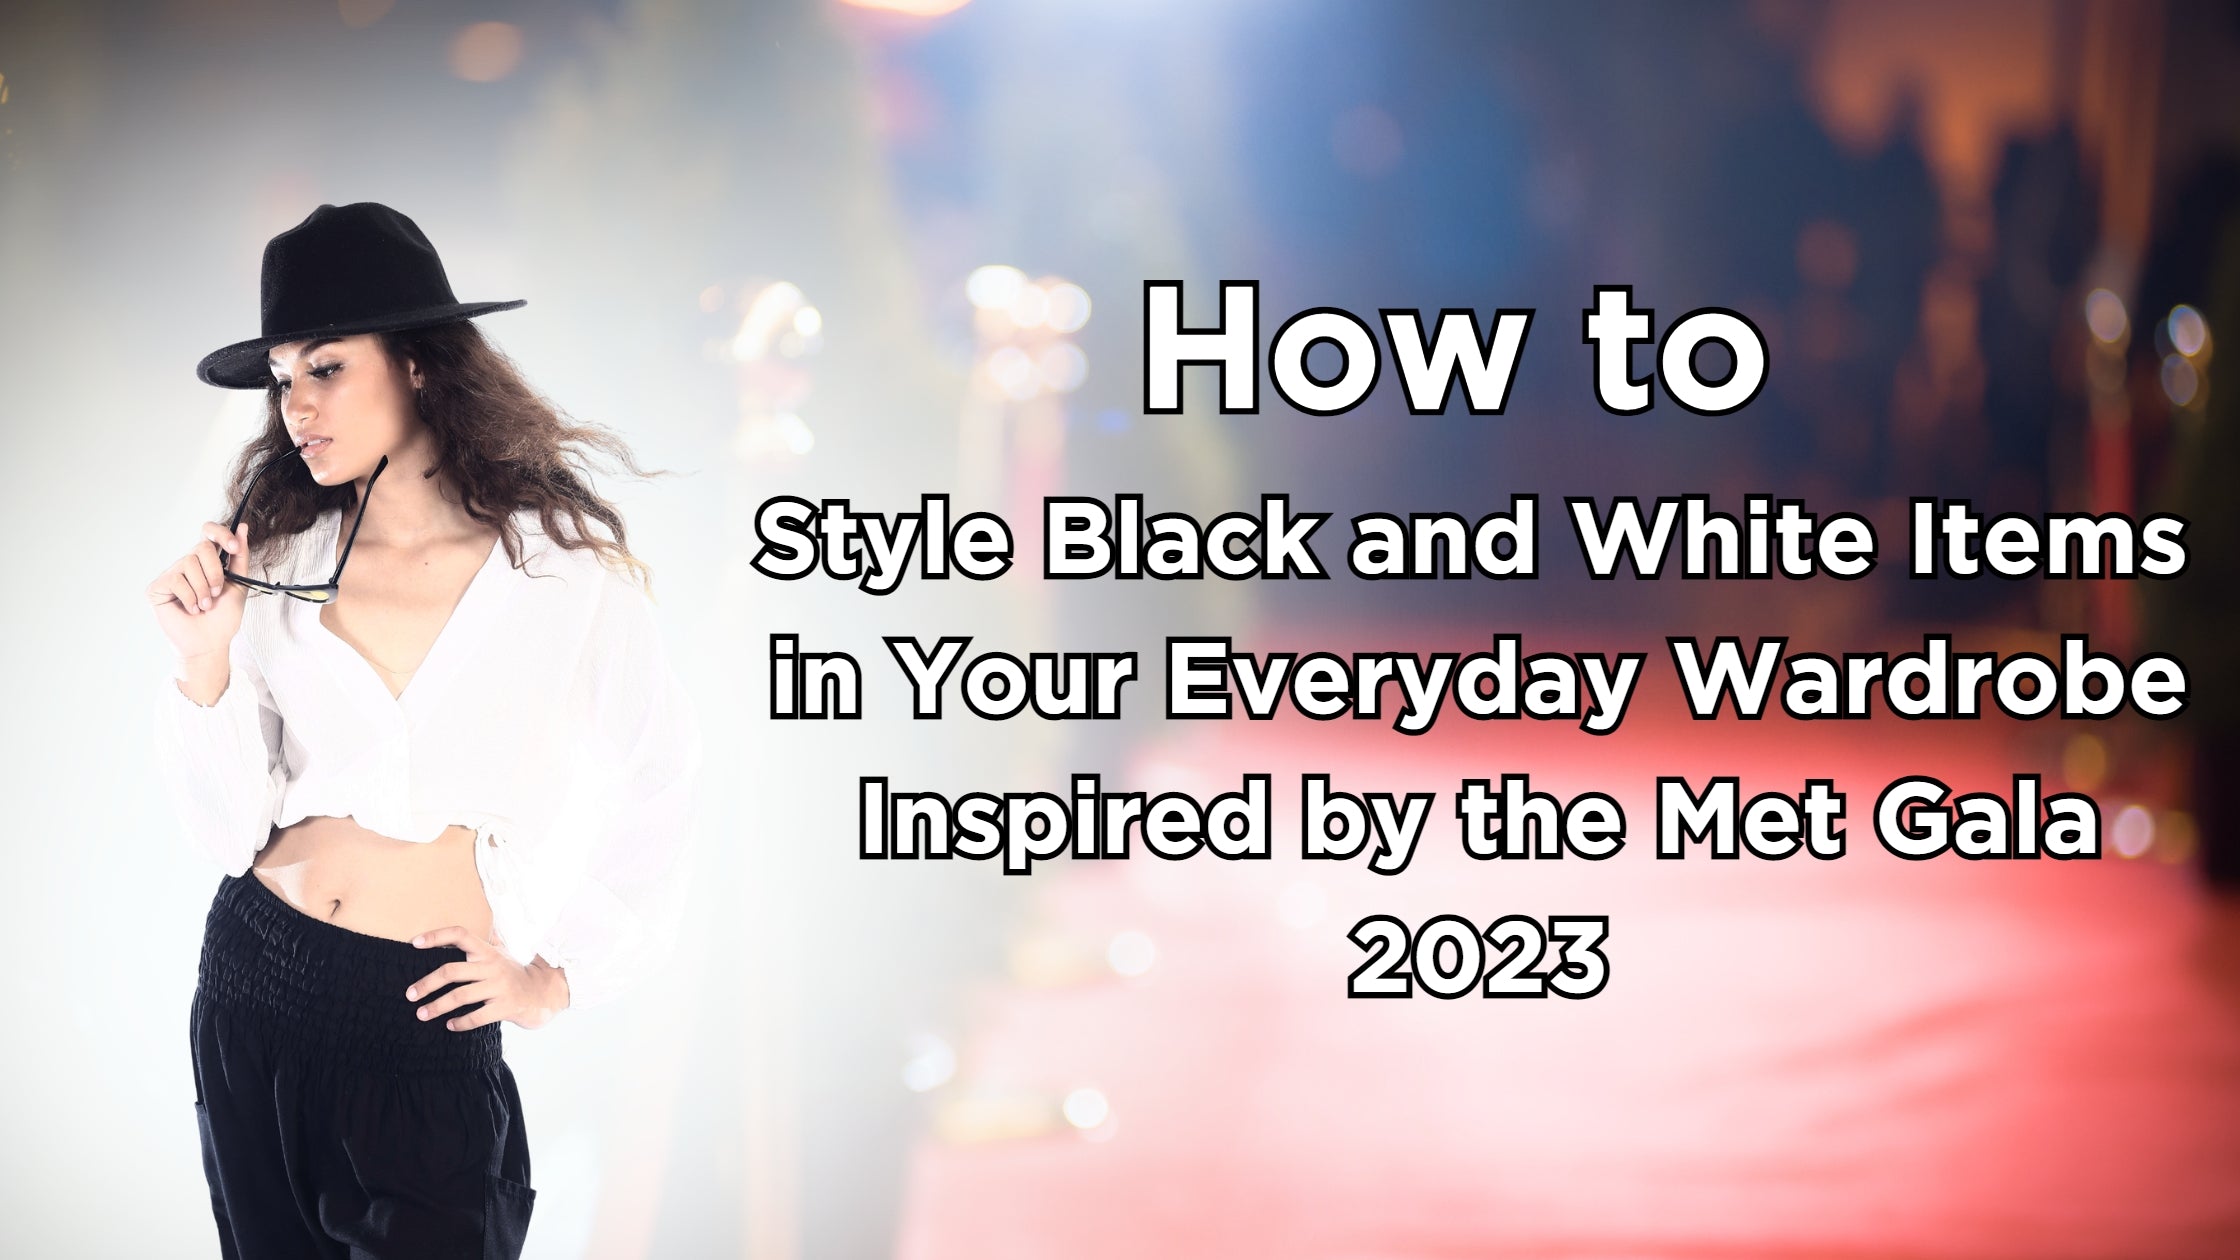 Women wearing Black and White in How to  Style Black and White Items  in Your Everyday Wardrobe Inspired by the Met Gala 2023